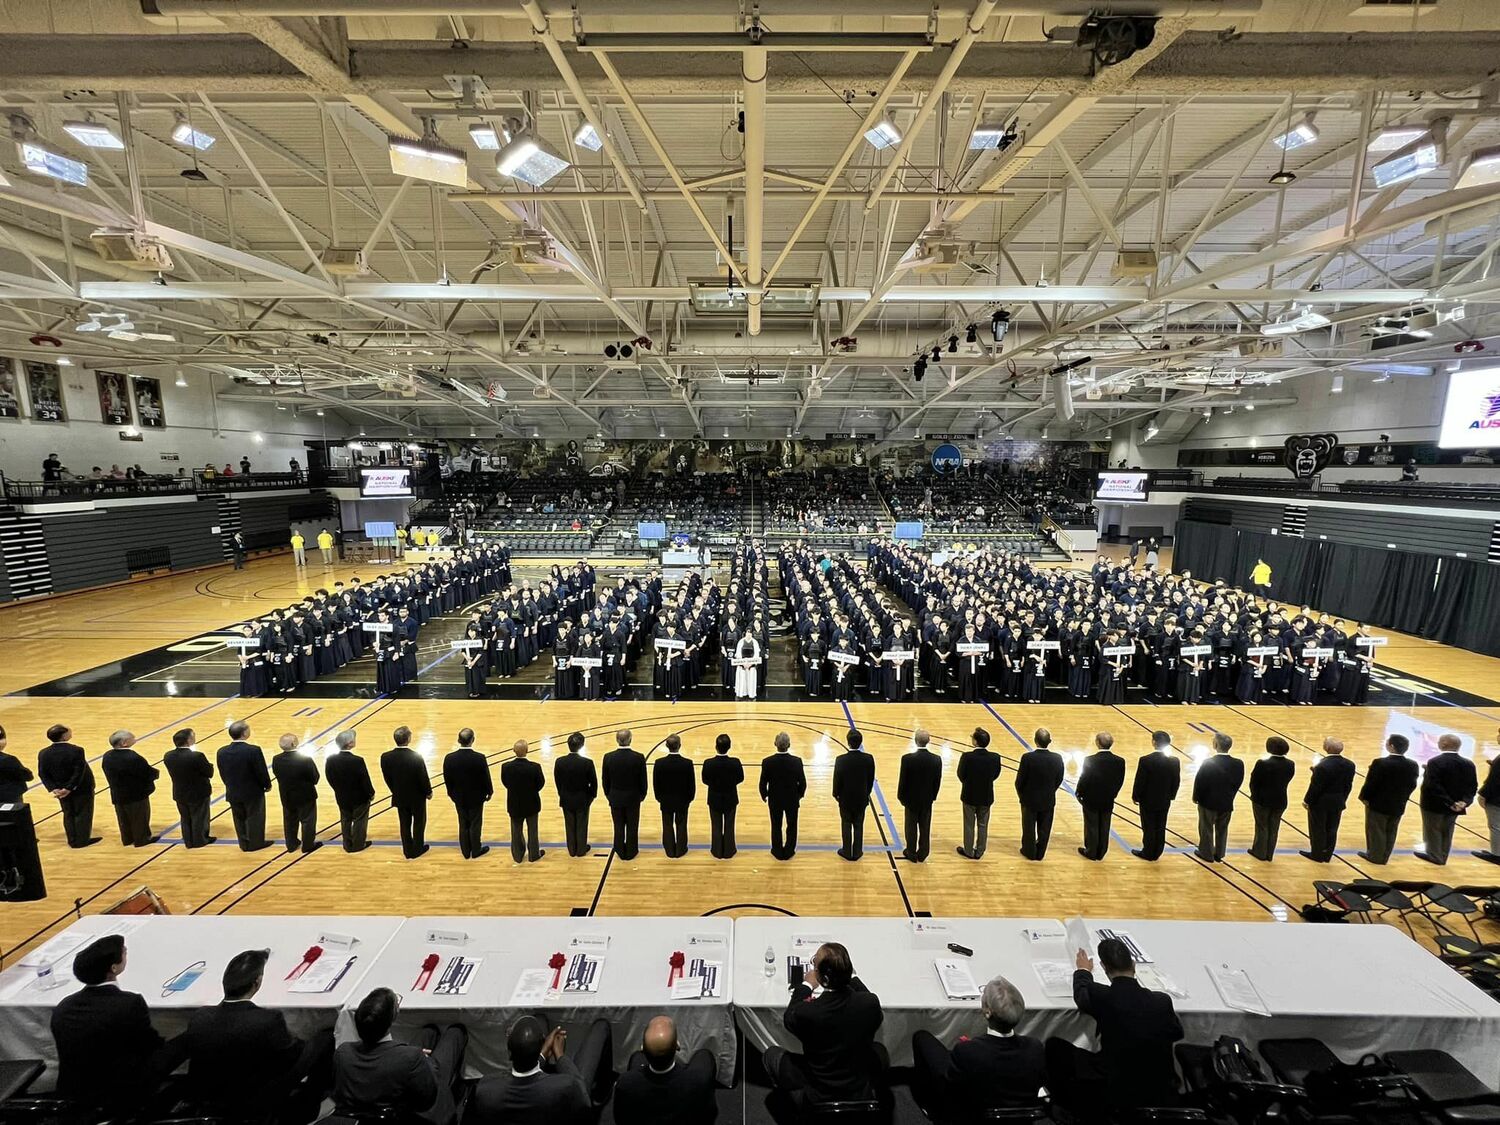 The opening ceremony of the 15th annual All United States Kendo Federation National Championships at the O’rena at Oakland University in Rochester, Michigan.